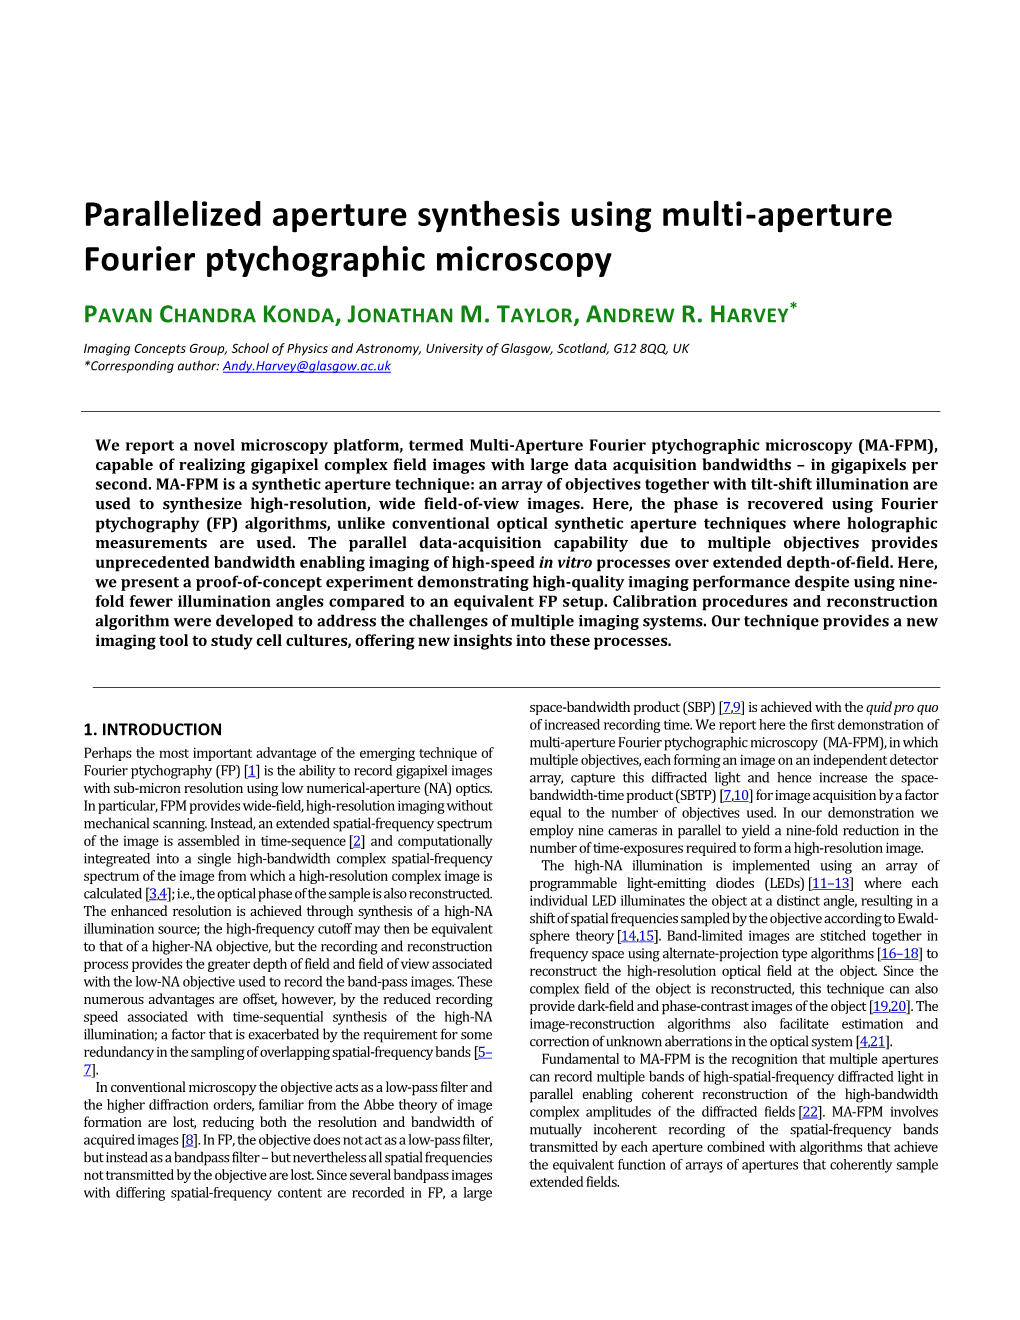 Parallelized Aperture Synthesis Using Multi-Aperture Fourier Ptychographic Microscopy